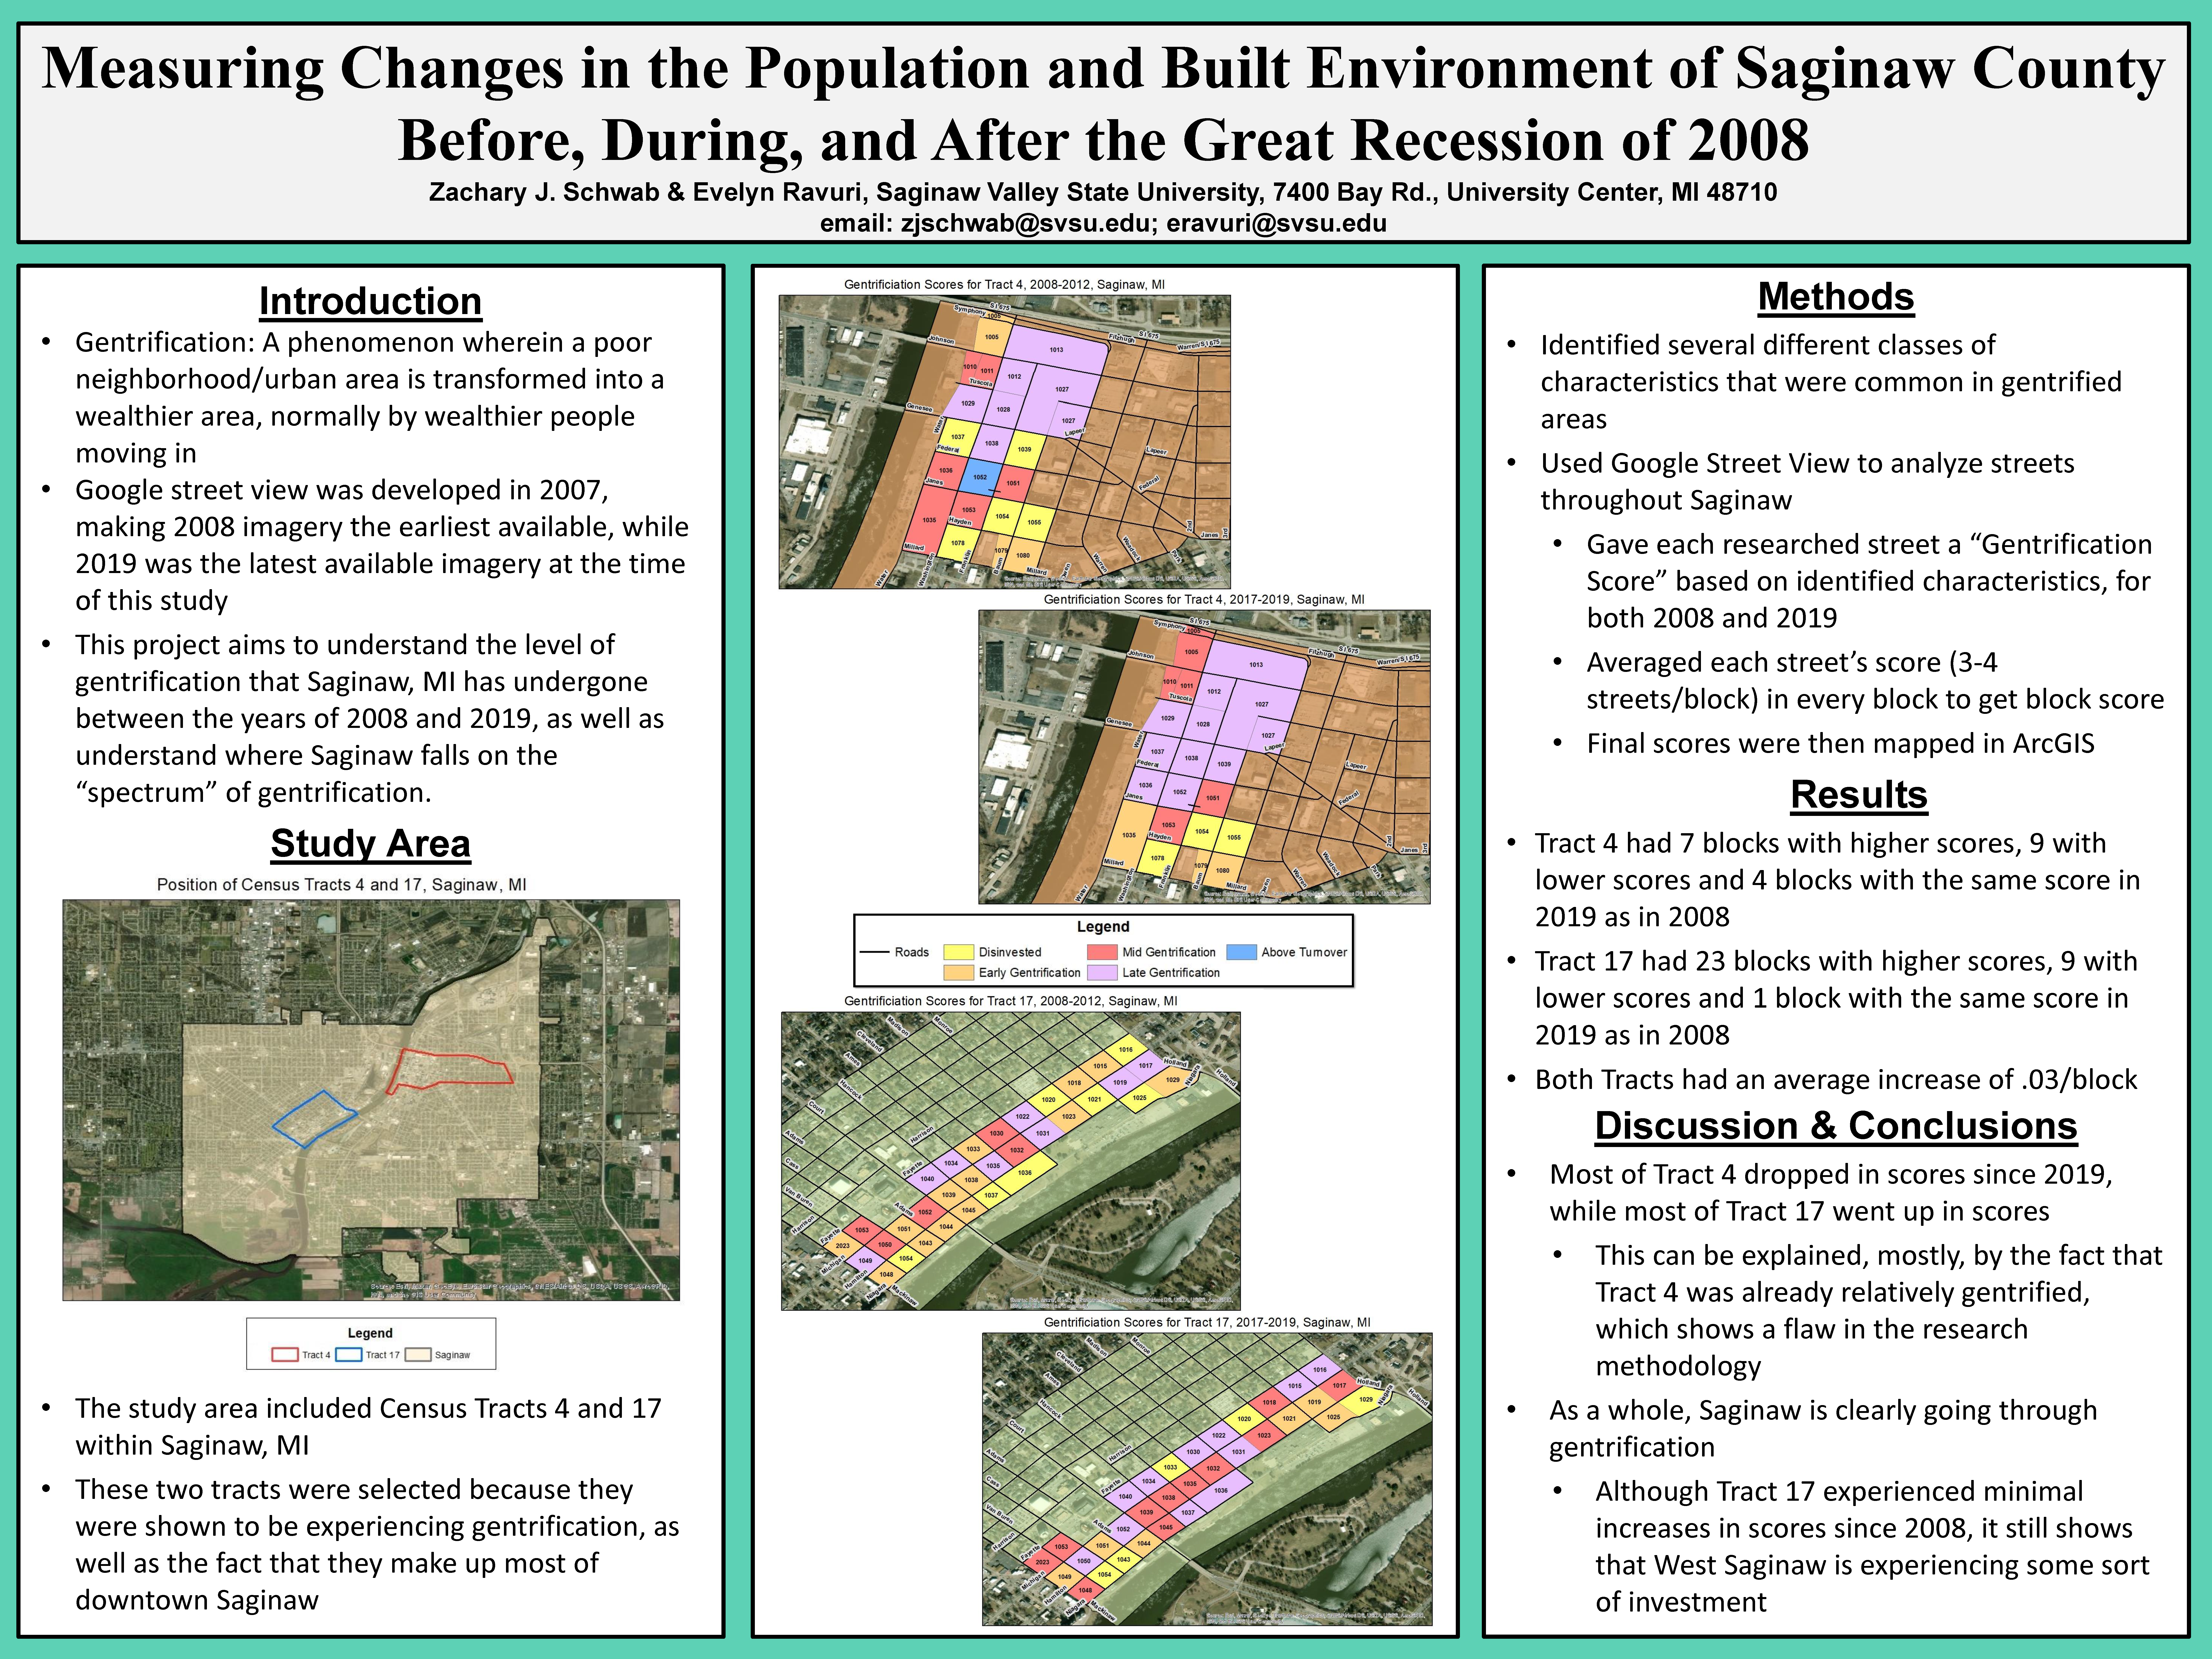 Measuring Changes in the Population and Built Environment of Saginaw County